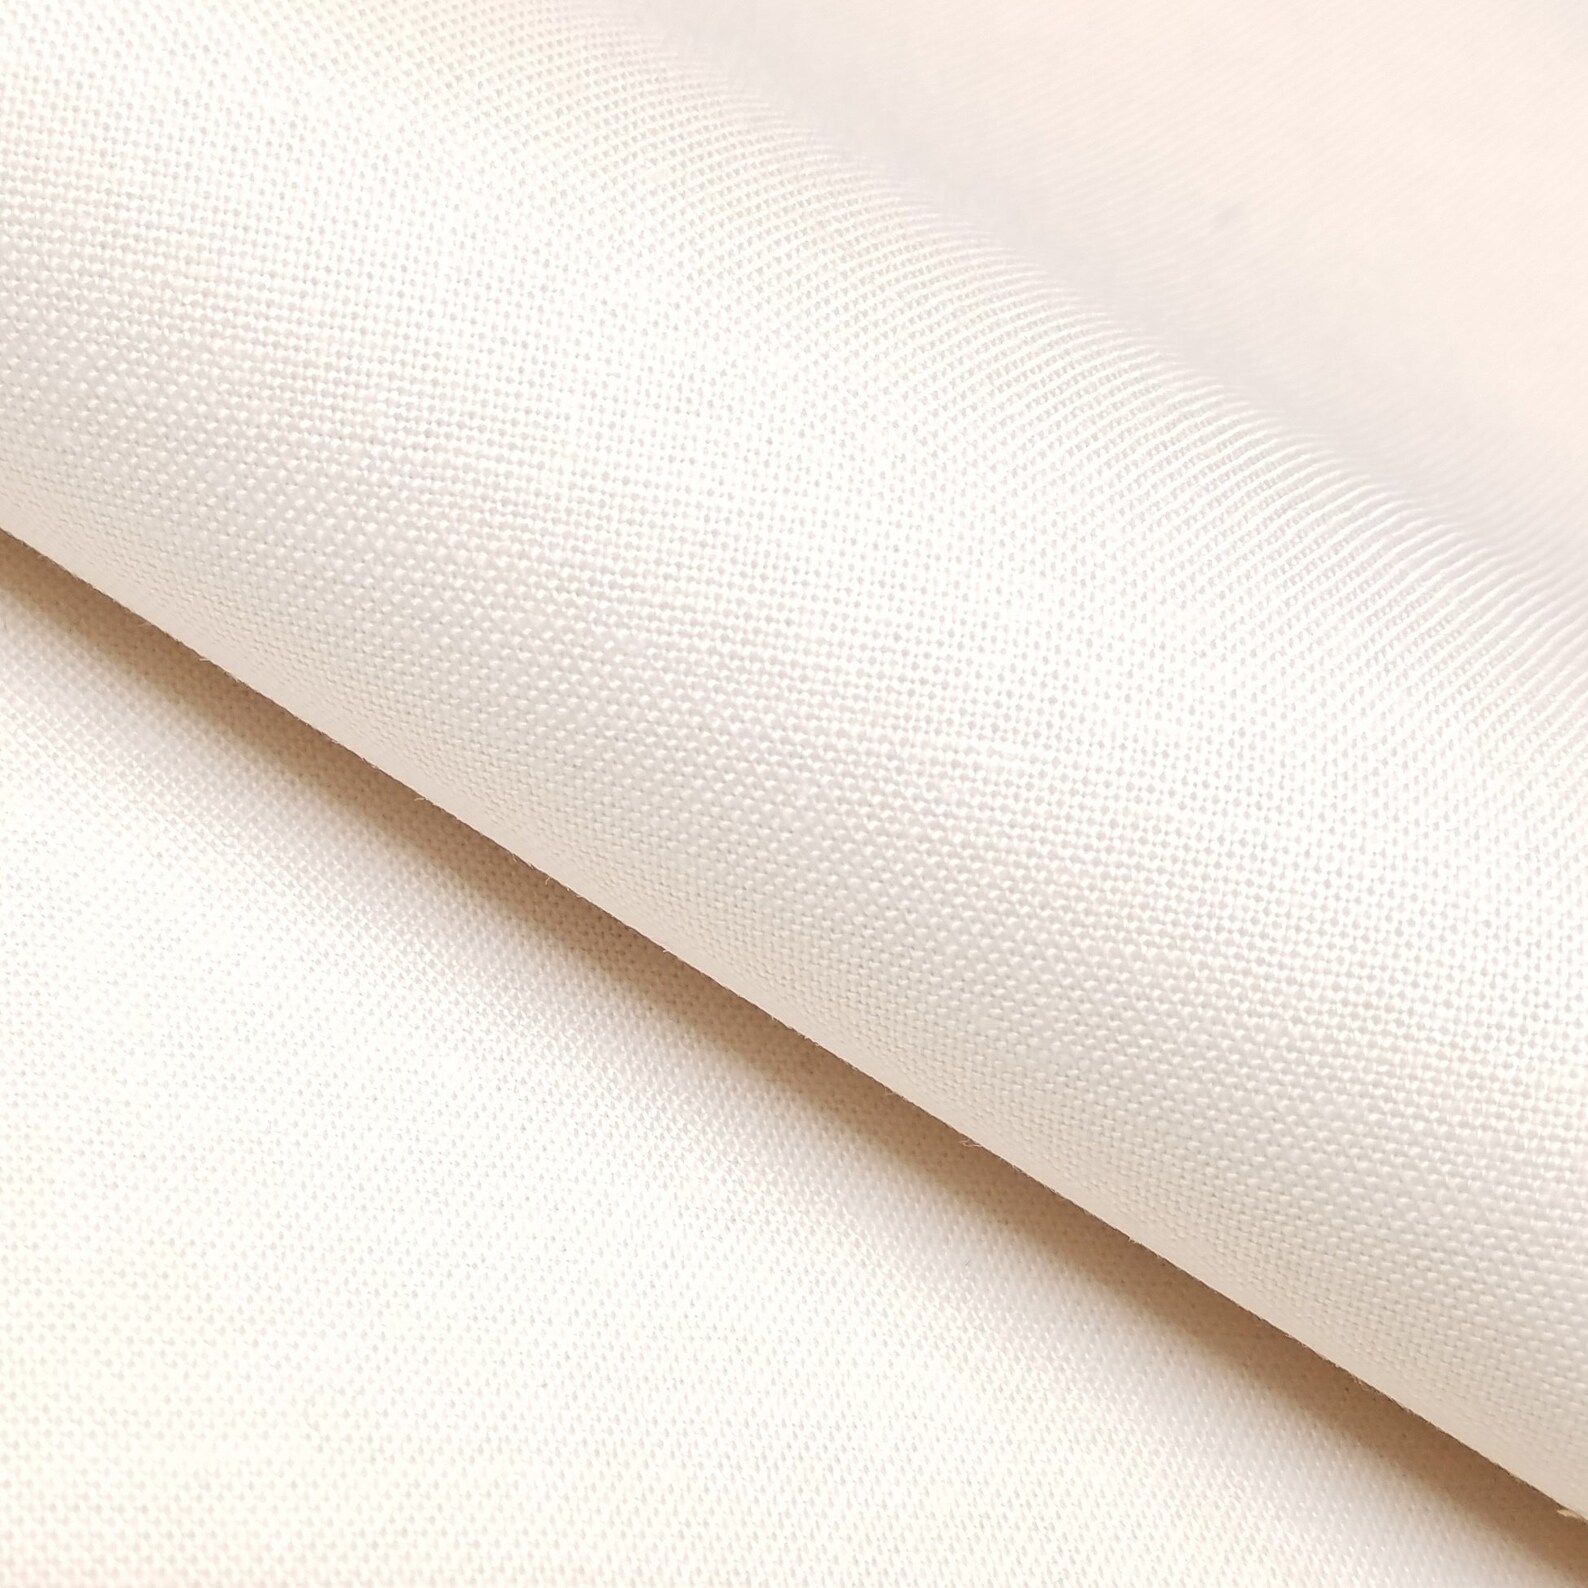 Kona Cotton Quilting Fabric Ivory Color 1181 - Etsy